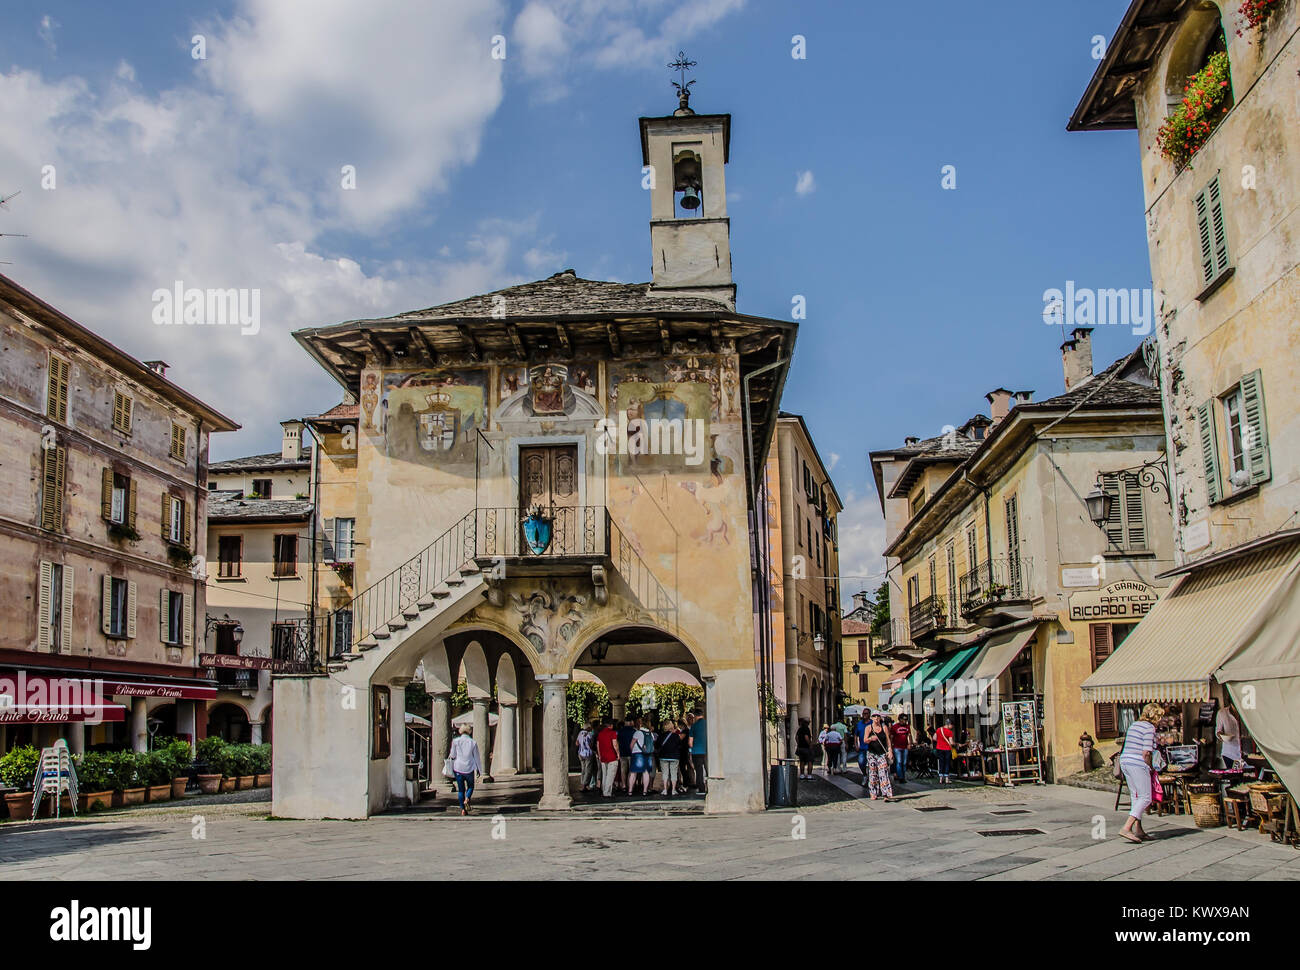 In its location facing Lake Orta, Orta San Giulio is a one of the top destinations for tourists visiting the Verbano Cusio Ossola province. Stock Photo